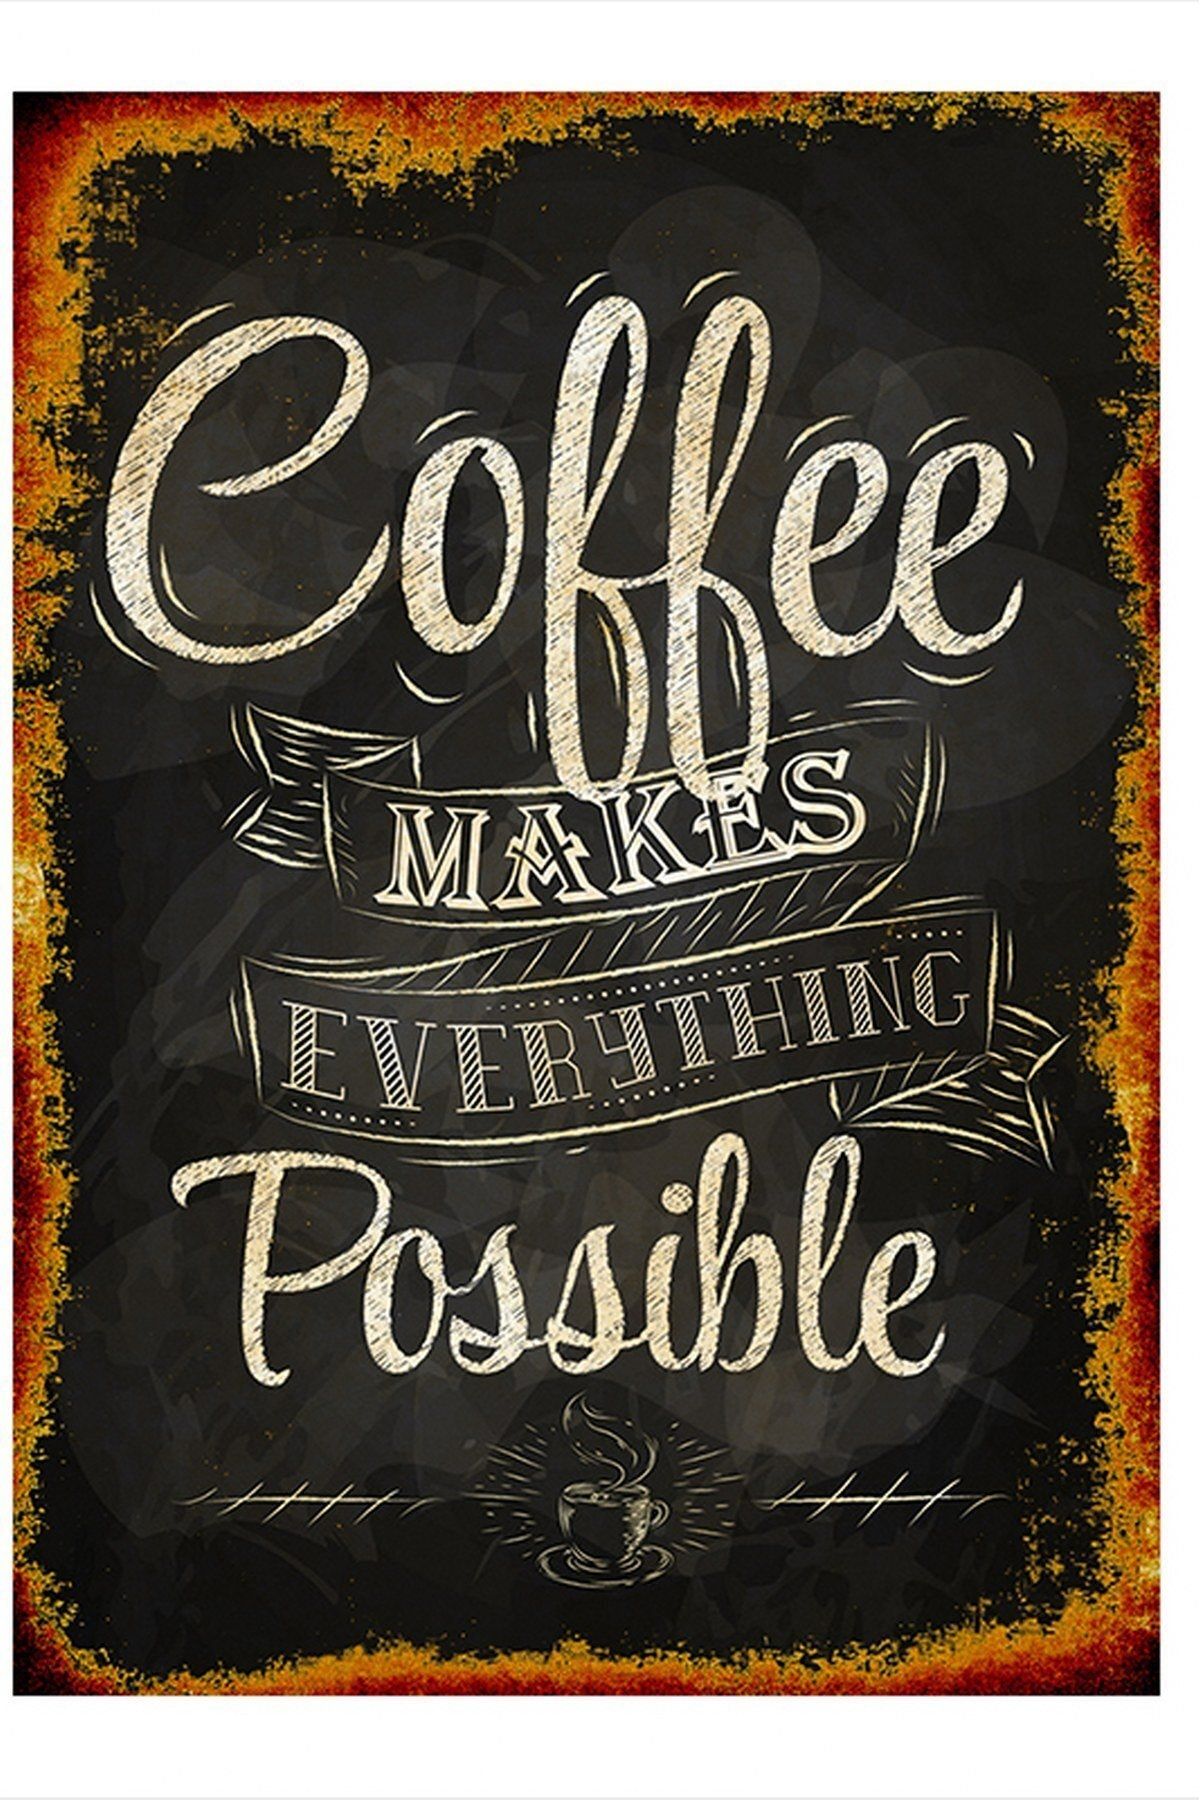 Tablomega Coffee Make Everything Possible Art Mdf Poster